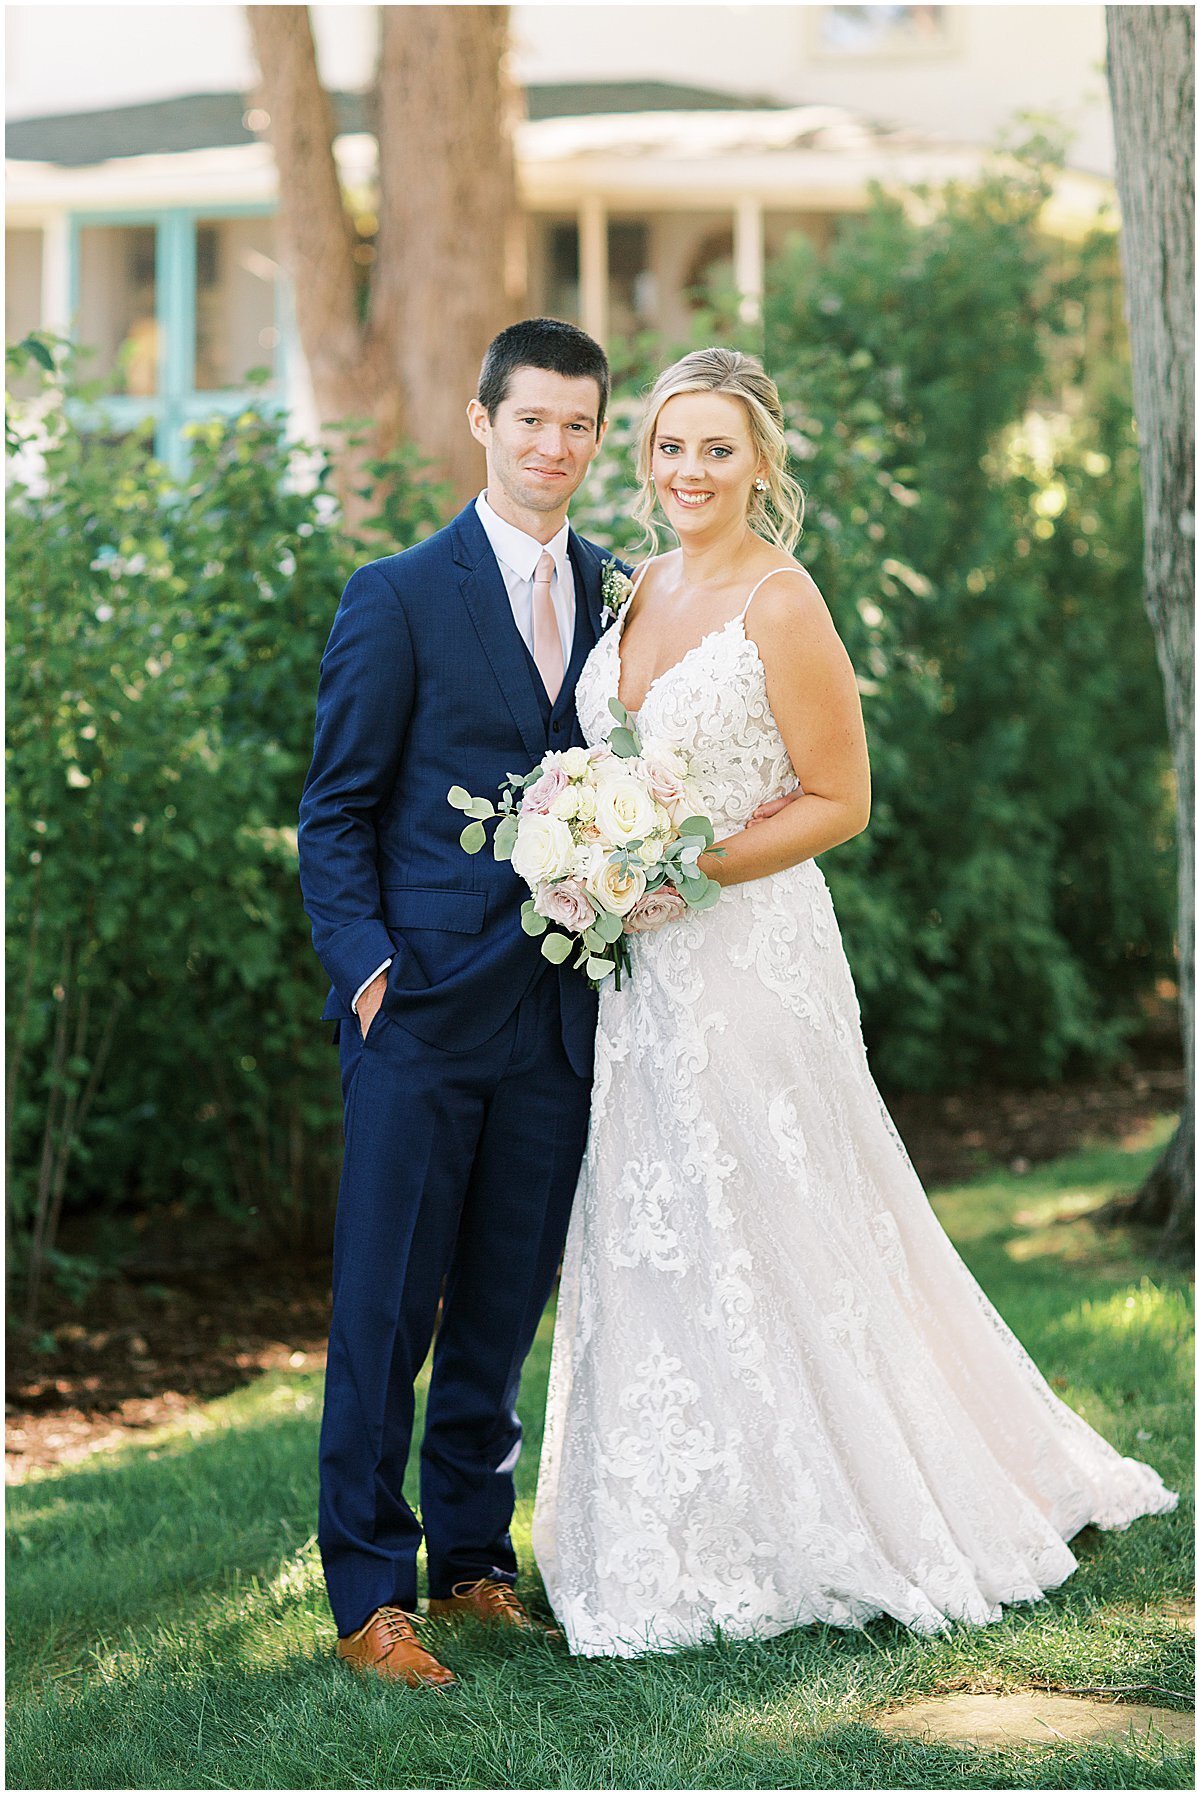 ivory-and-beau-bride-michelle-wedding-dress-bridal-gown-wedding-gown-bridal-shop-bridal-boutique-bride-bridal-shopping-real-bride-maggie-sottero-Lake-Wawasee-Wedding-with-Sami-Renee-Photography_0021 copy.jpg